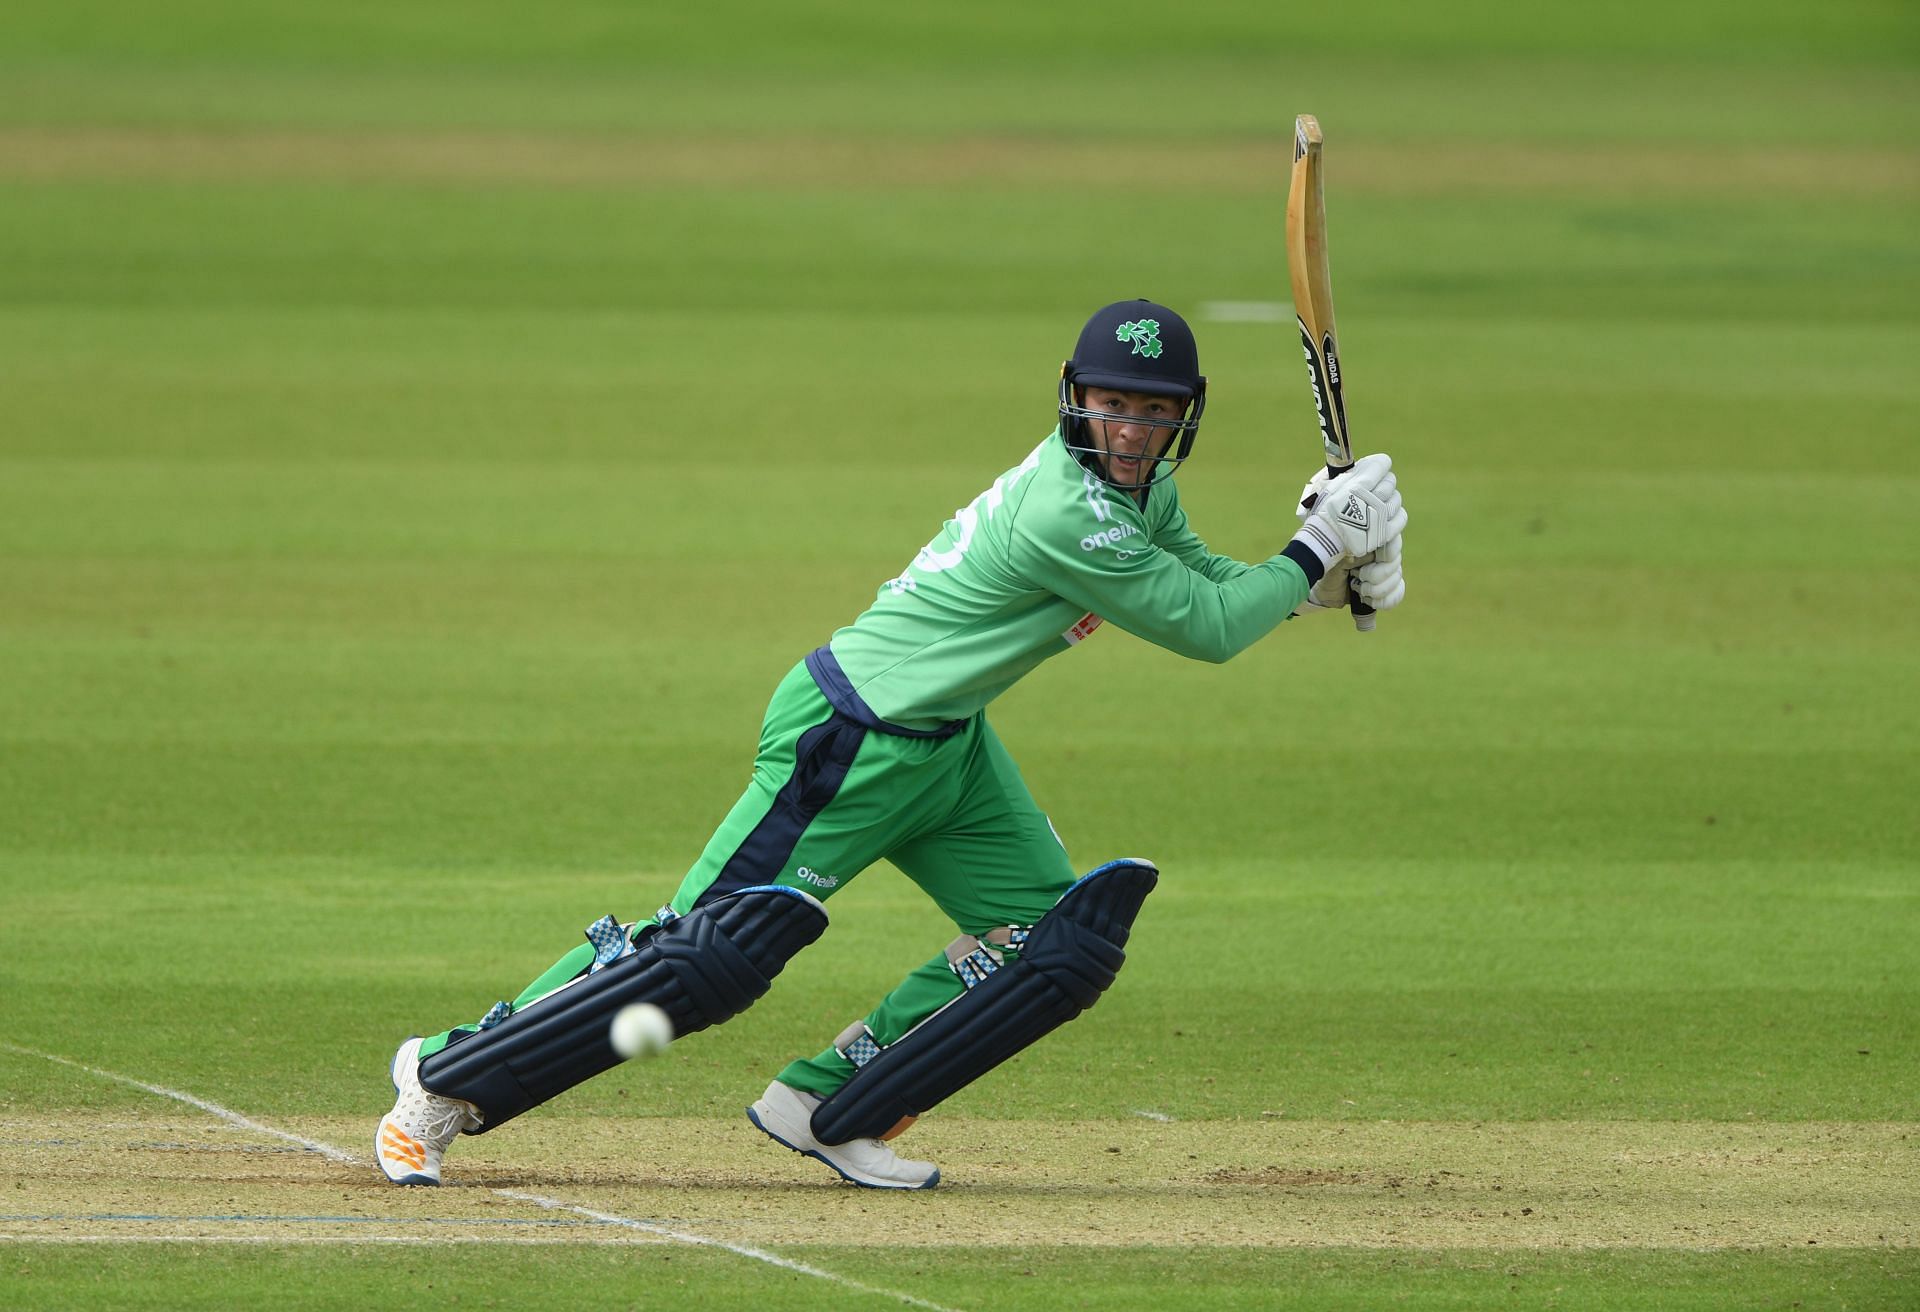 Curtis Campher is a vital member of the Irish batting lineup